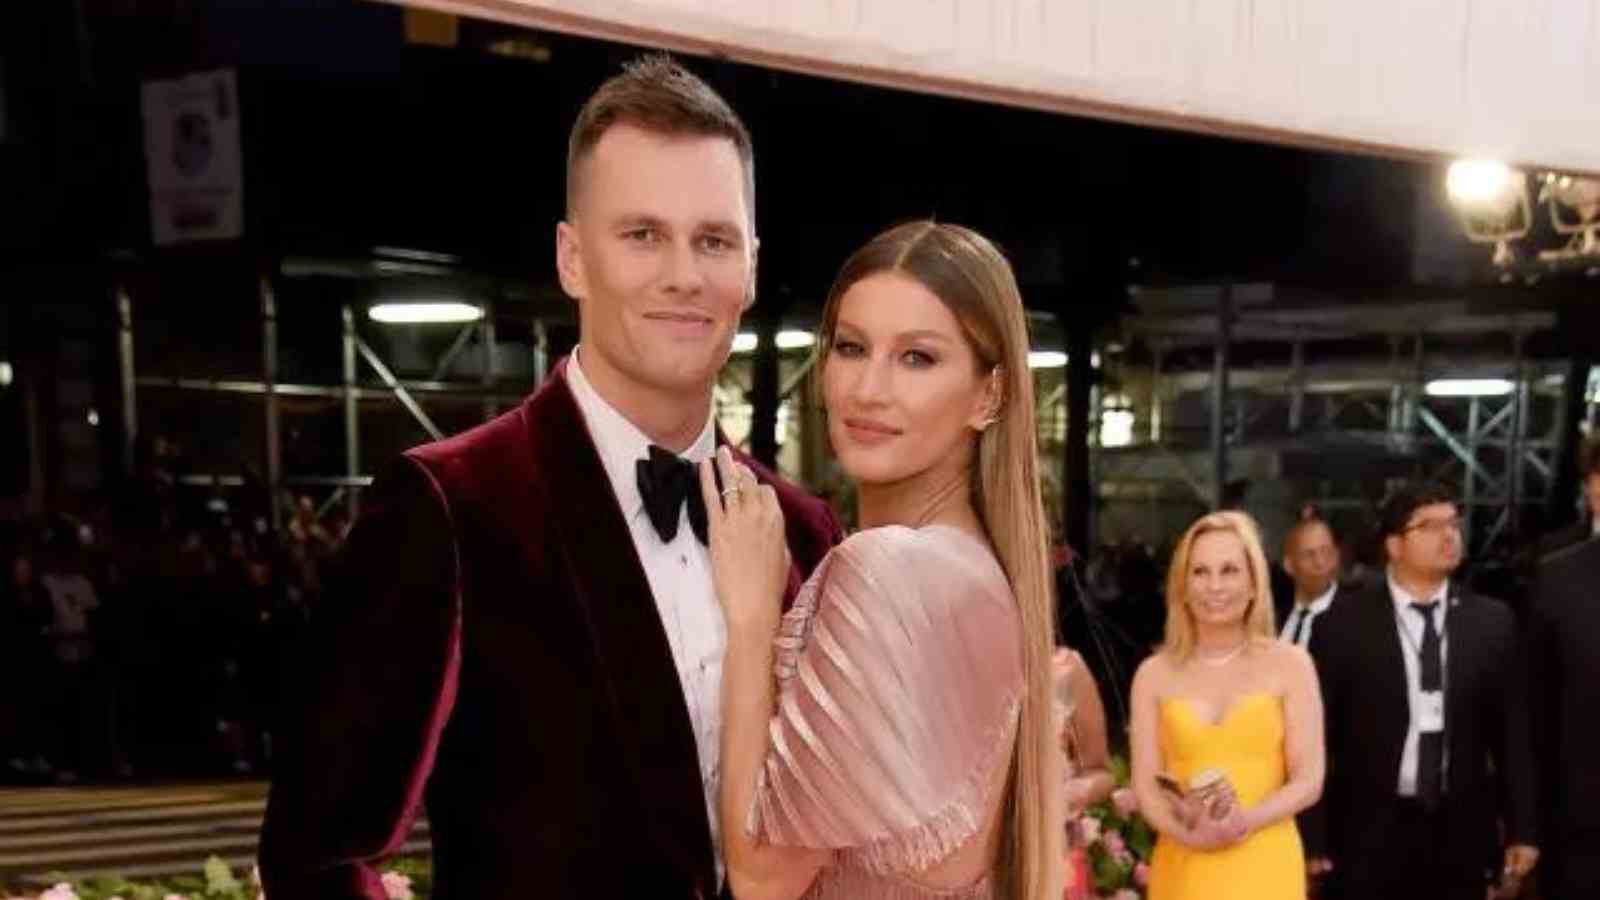 Gisele Bündchen shares why her marriage with Tom Brady didn't work